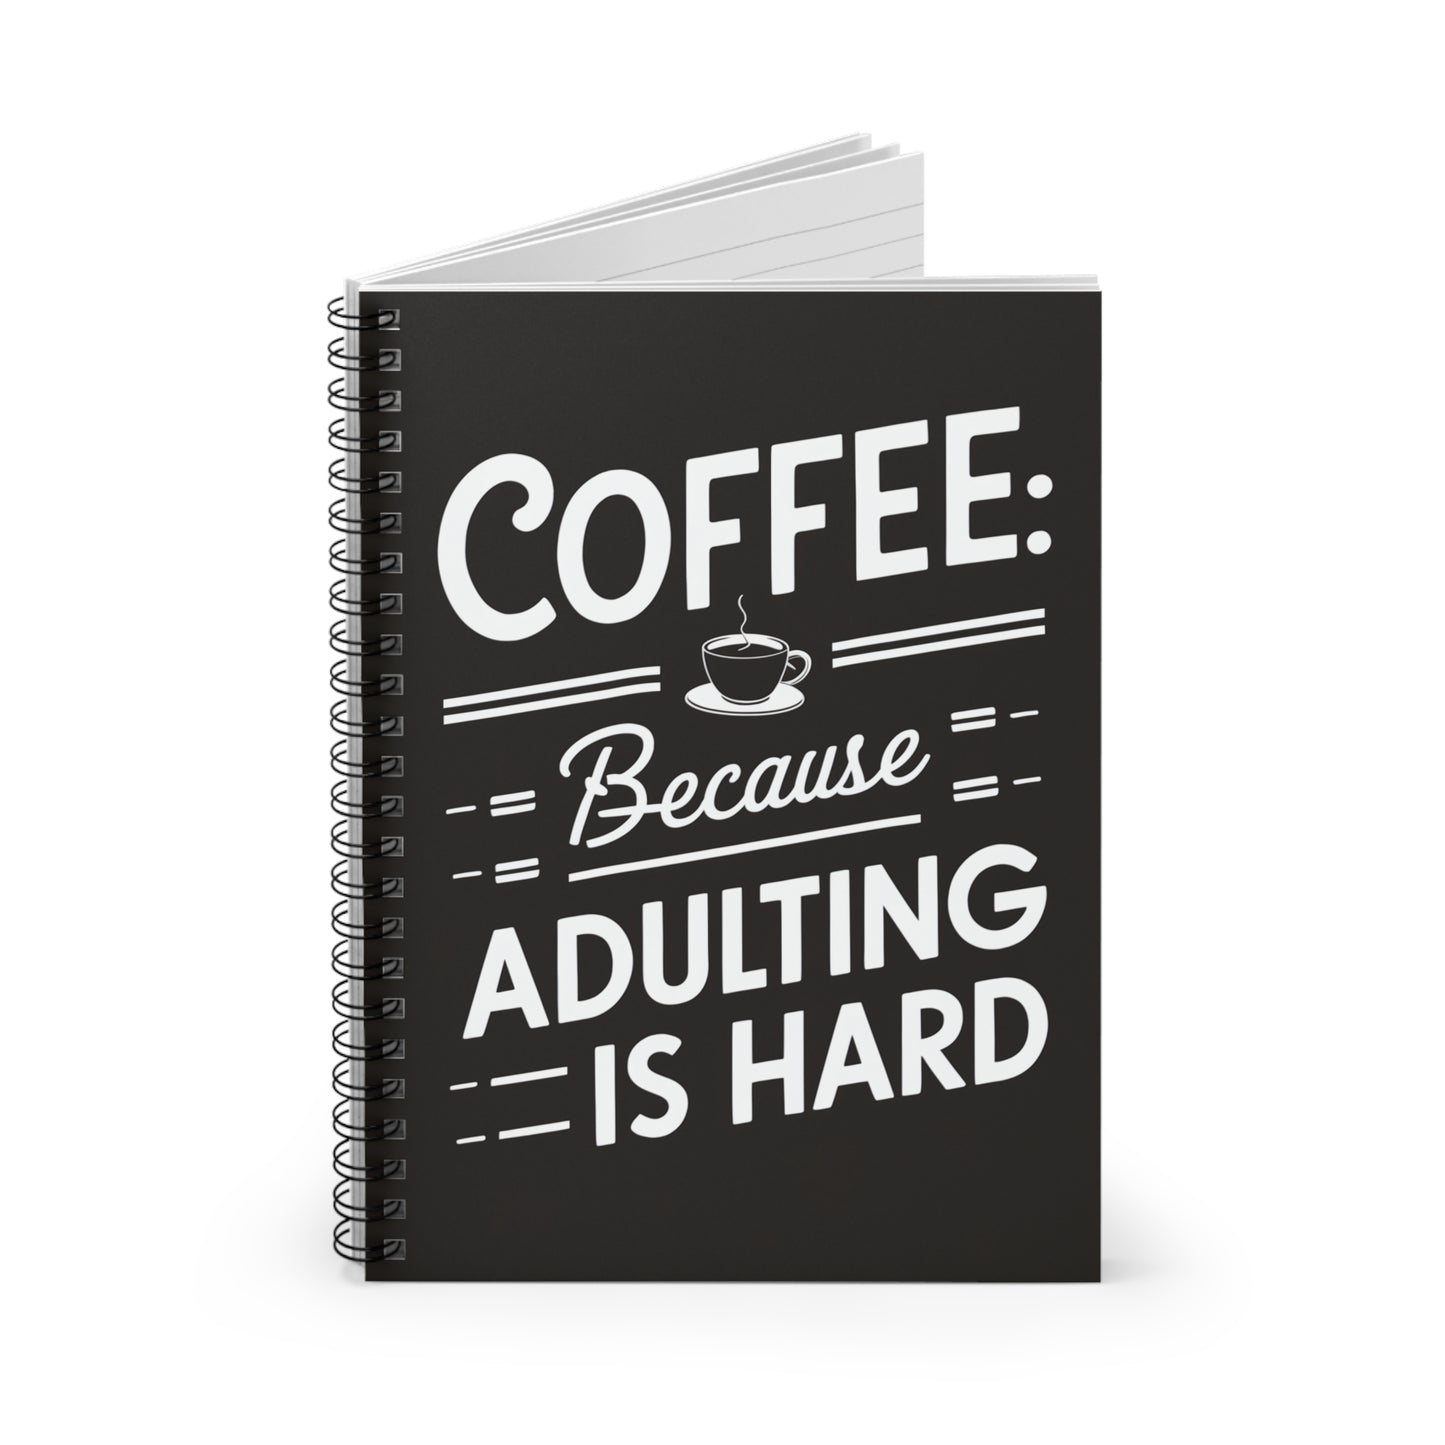 "Coffee: Because Adulting Is Hard" Spiral Notebook - Coffee Time Classics